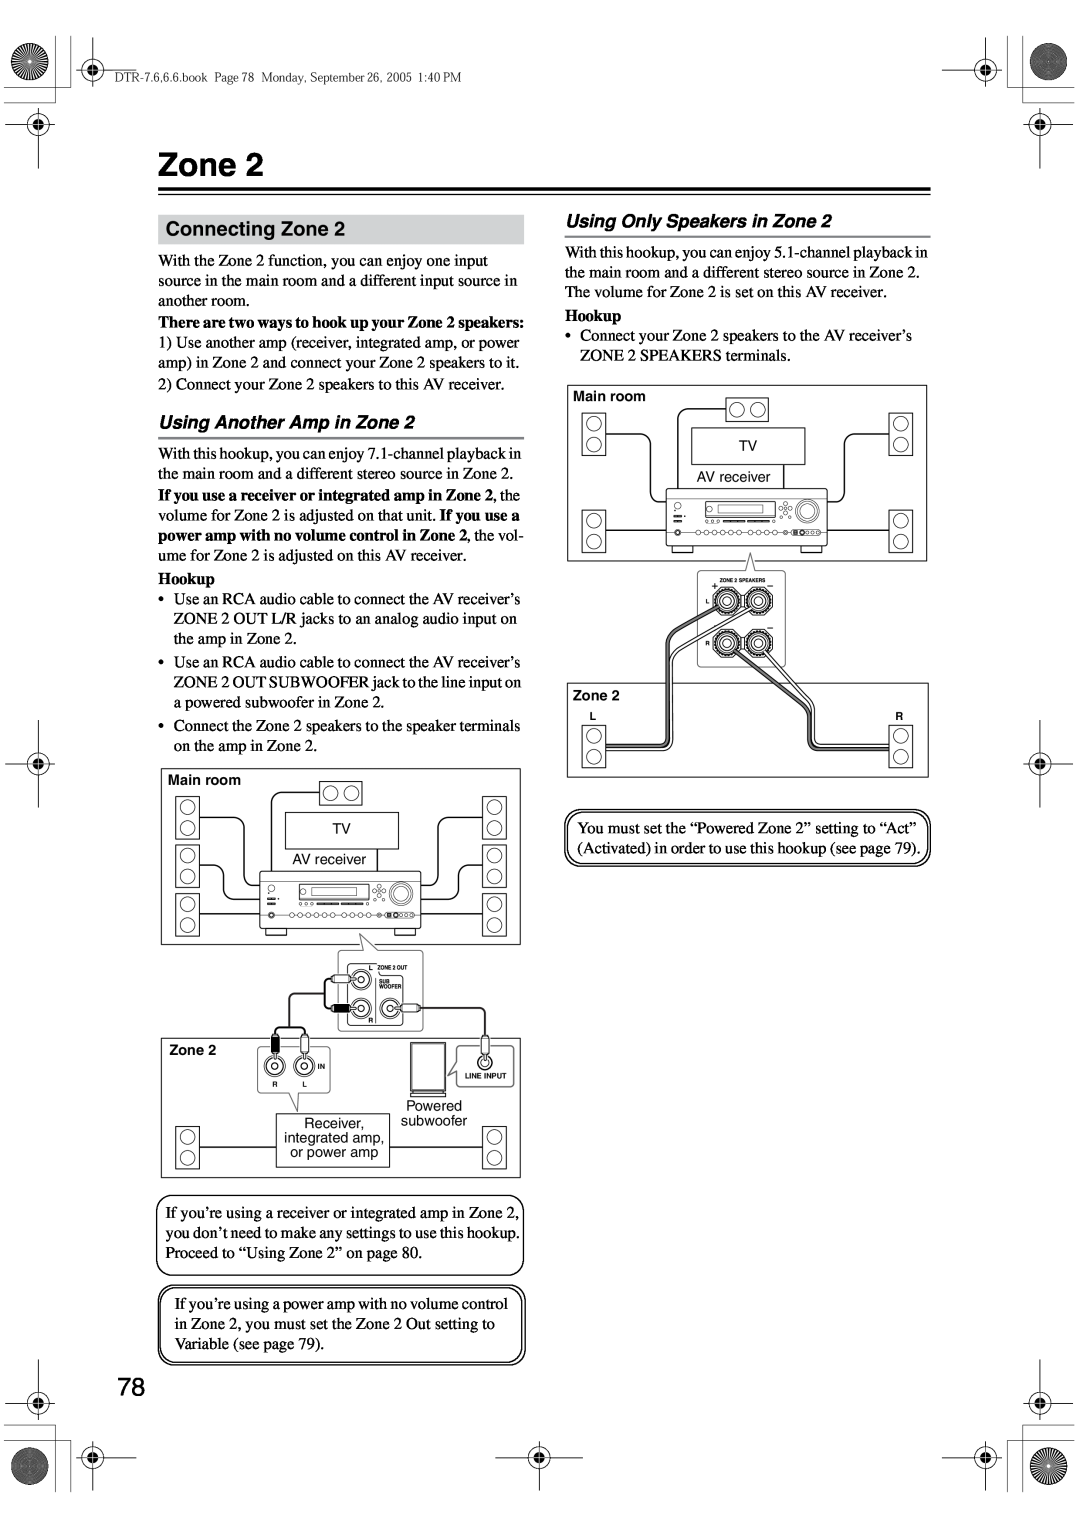 Integra DTR-7.6/6.6 instruction manual Connecting Zone, Using Another Amp in Zone, Using Only Speakers in Zone, Hookup 